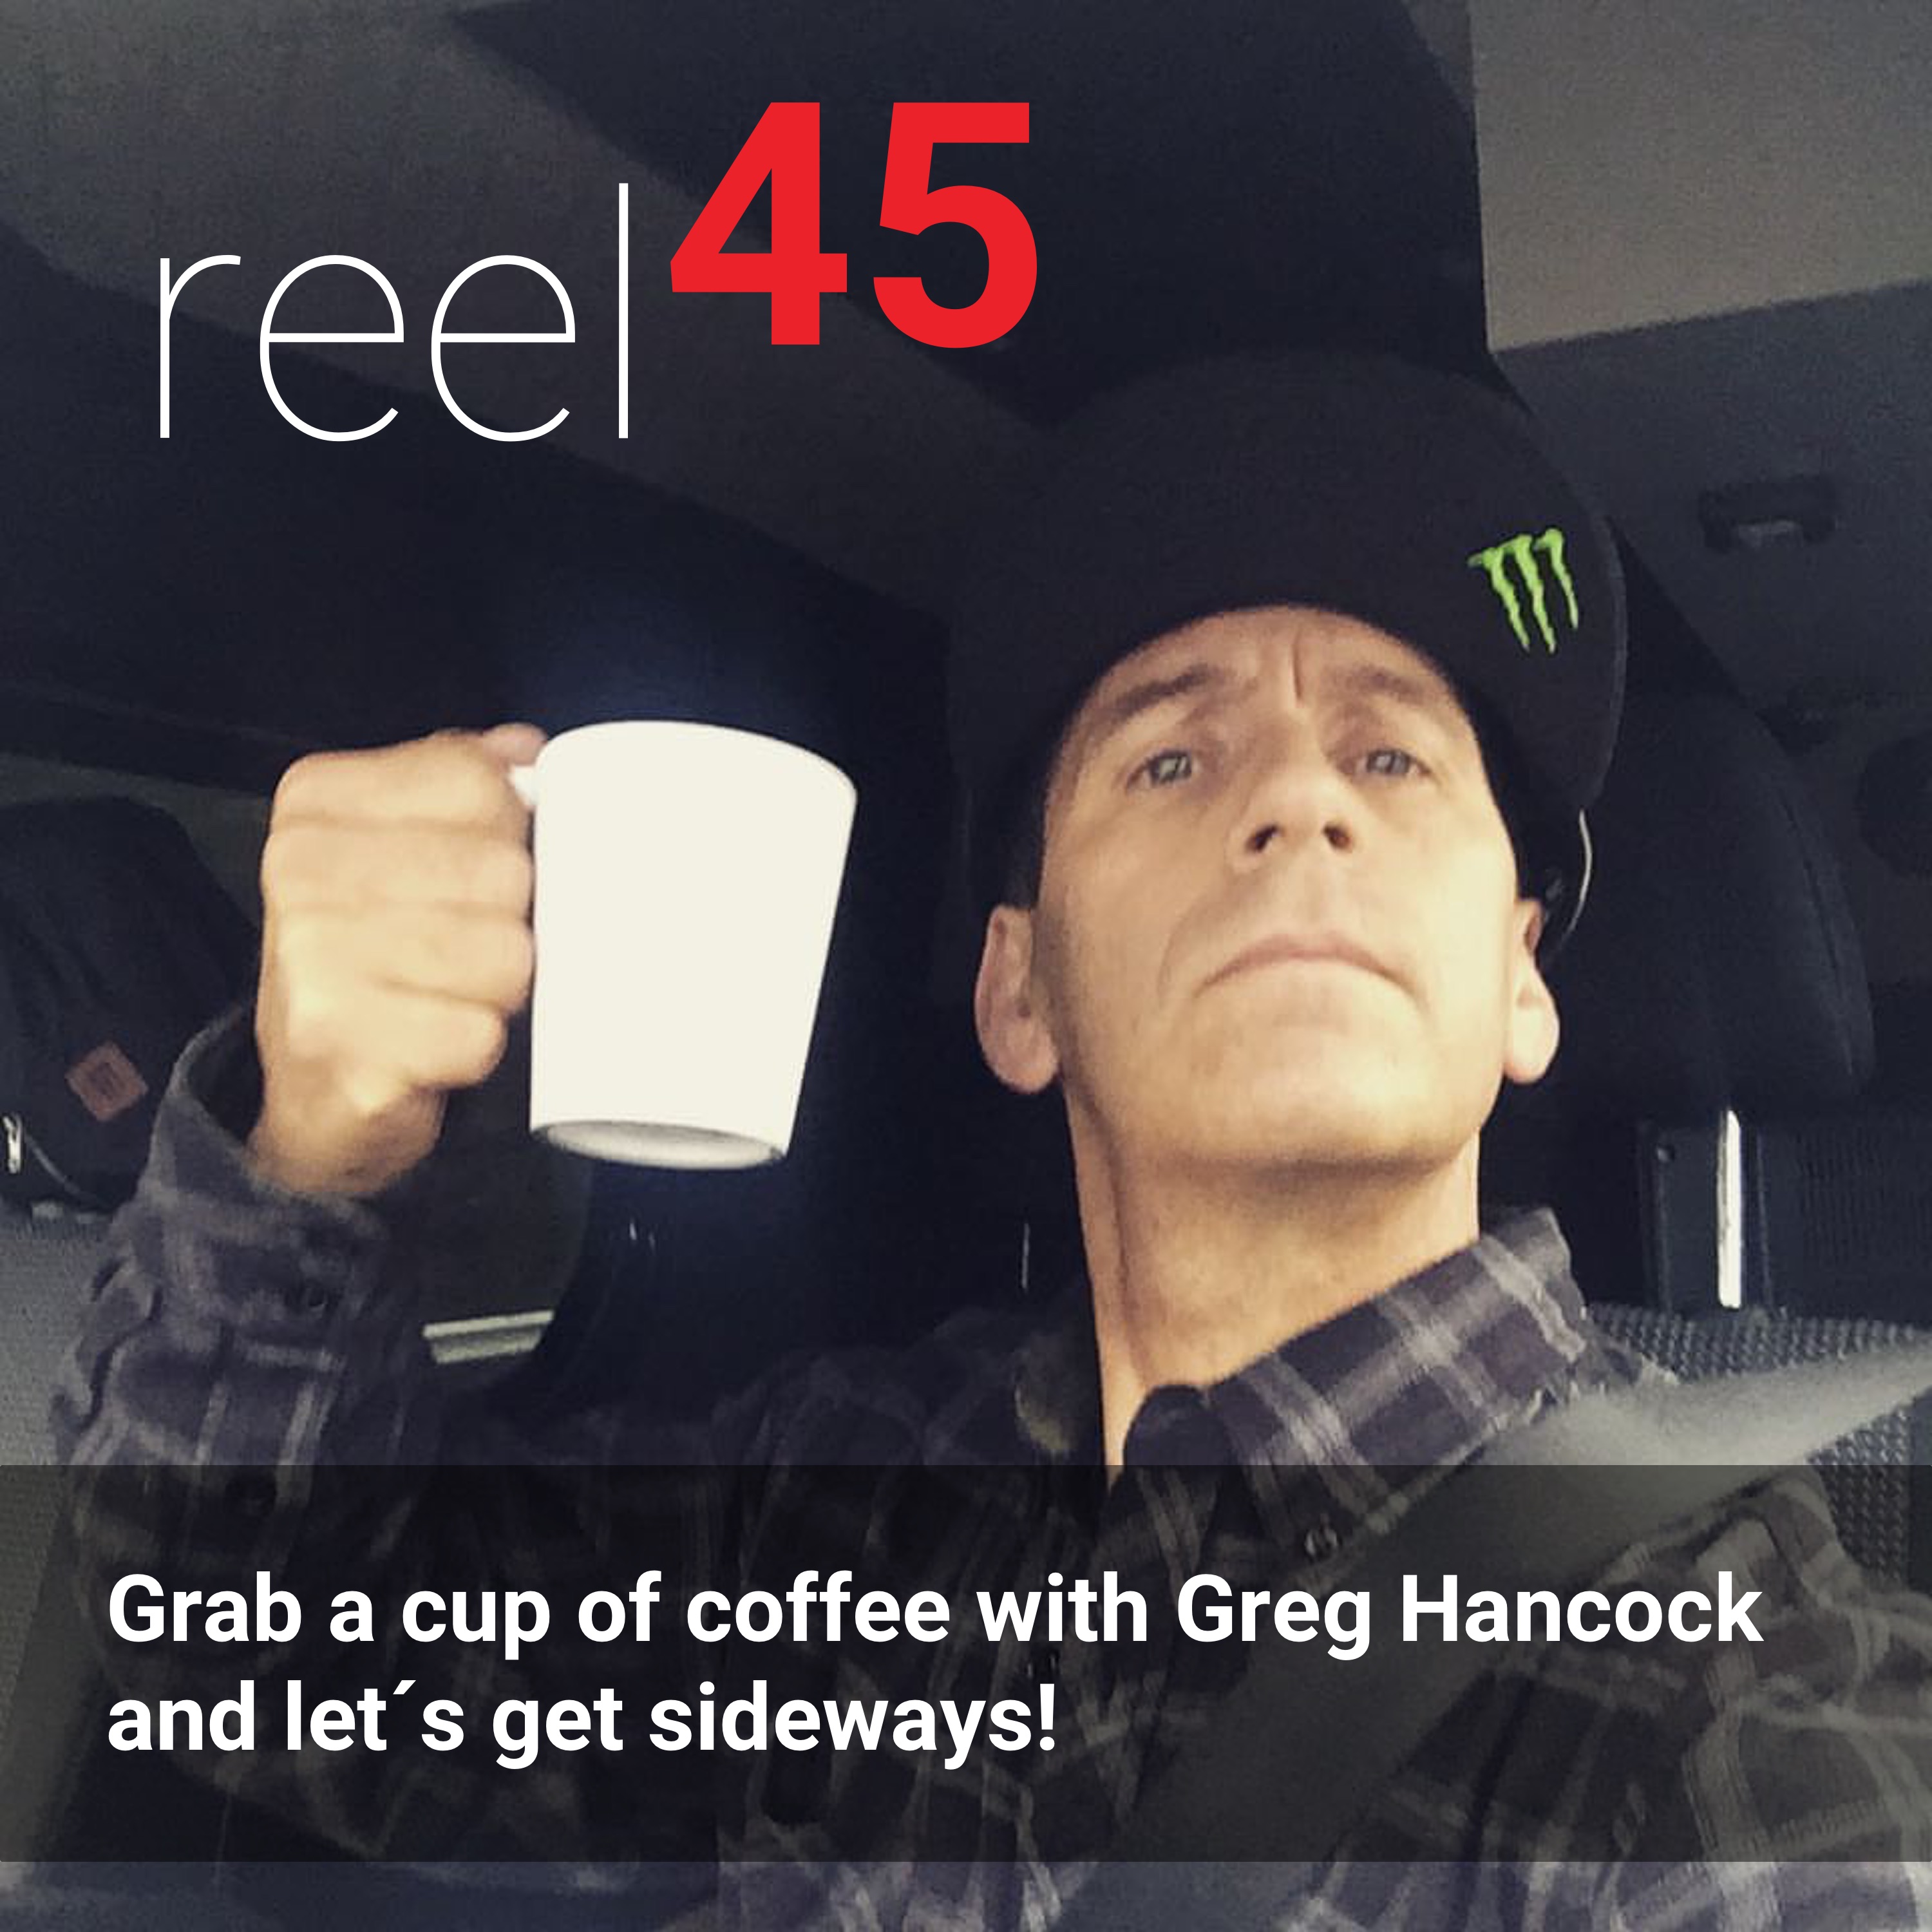 Episode 1 - Welcome to reel45, the first cup